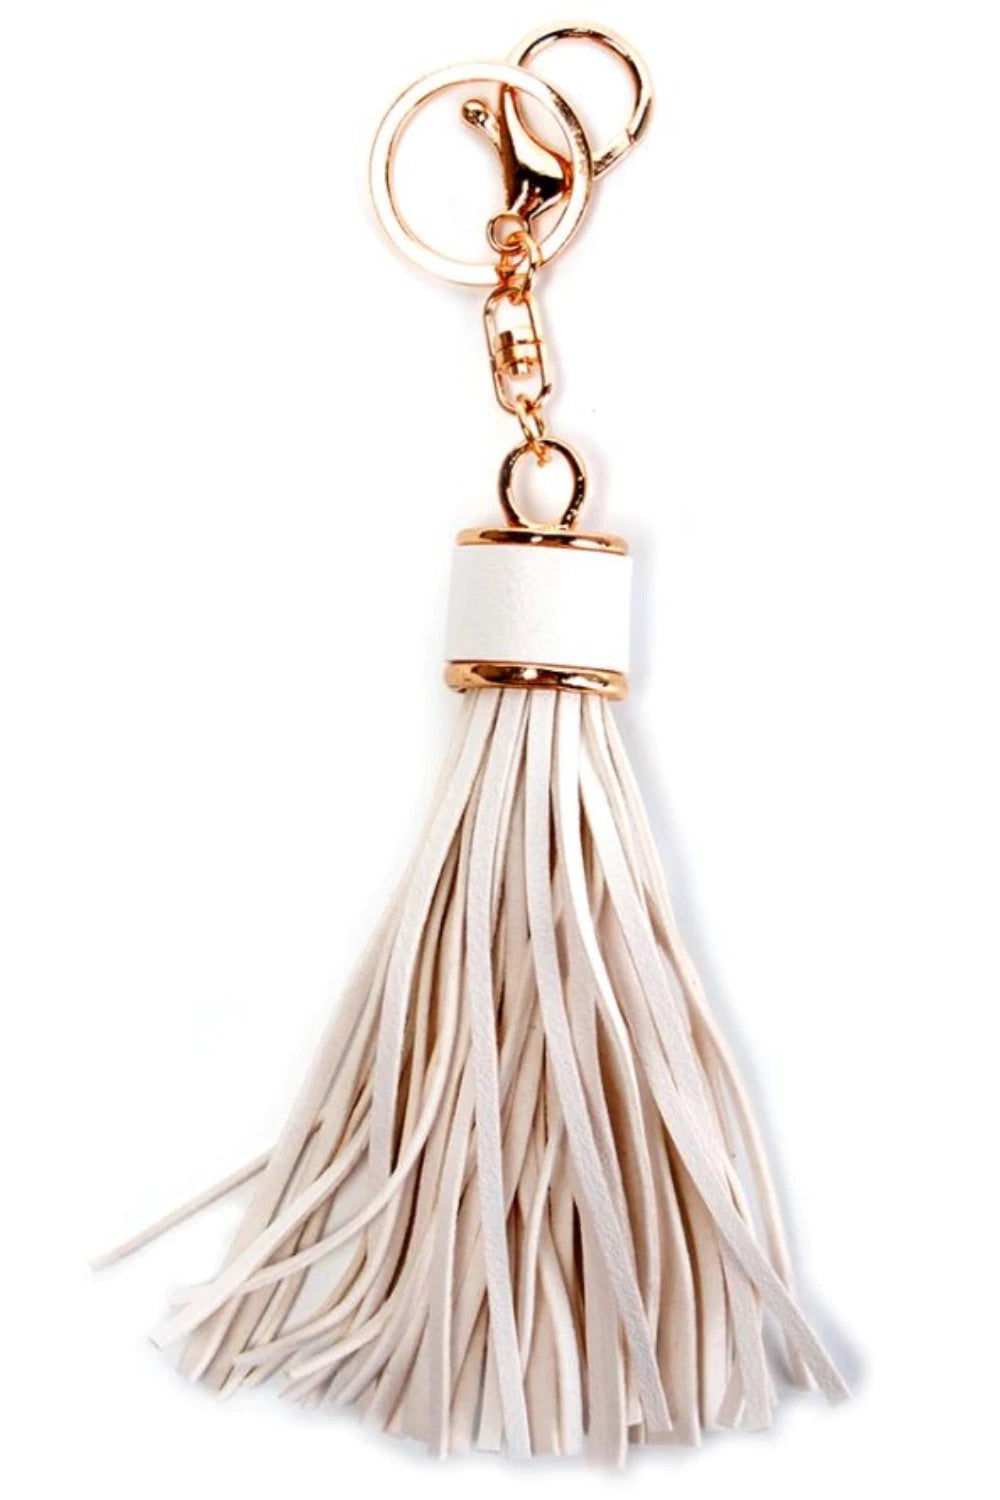 White leather tassle with gold details